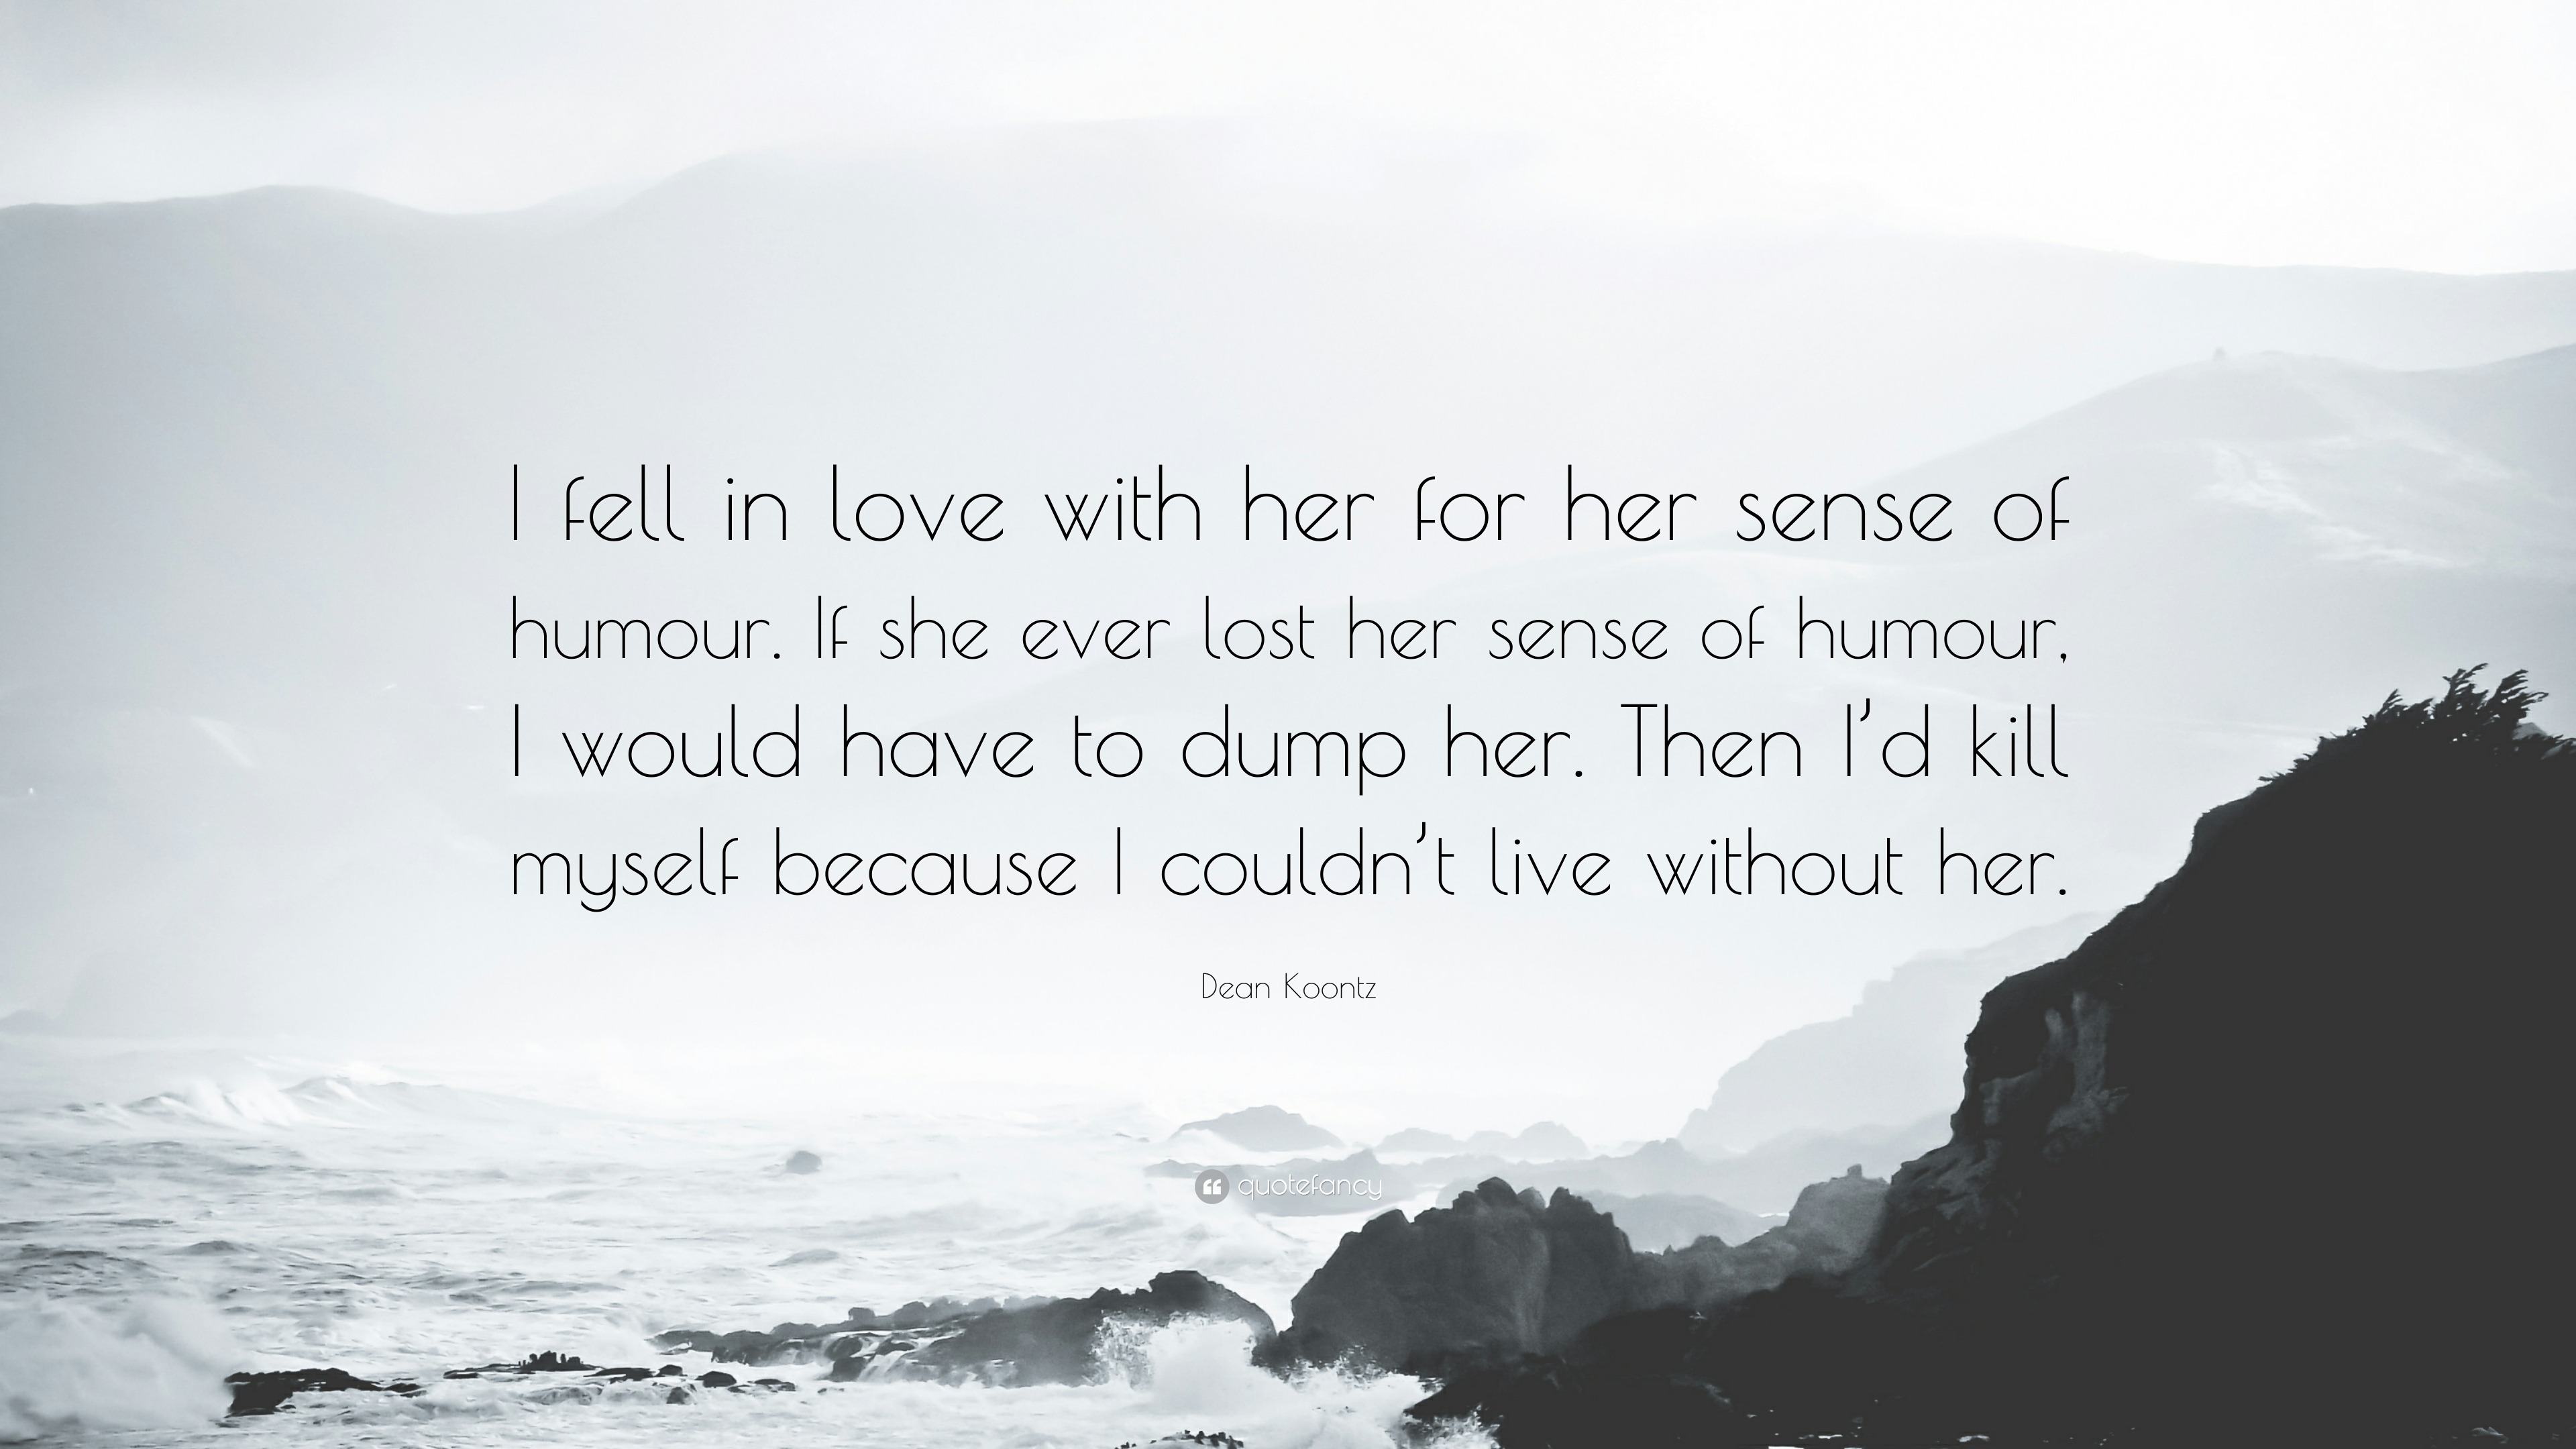 Dean Koontz Quote “I fell in love with her for her sense of humour